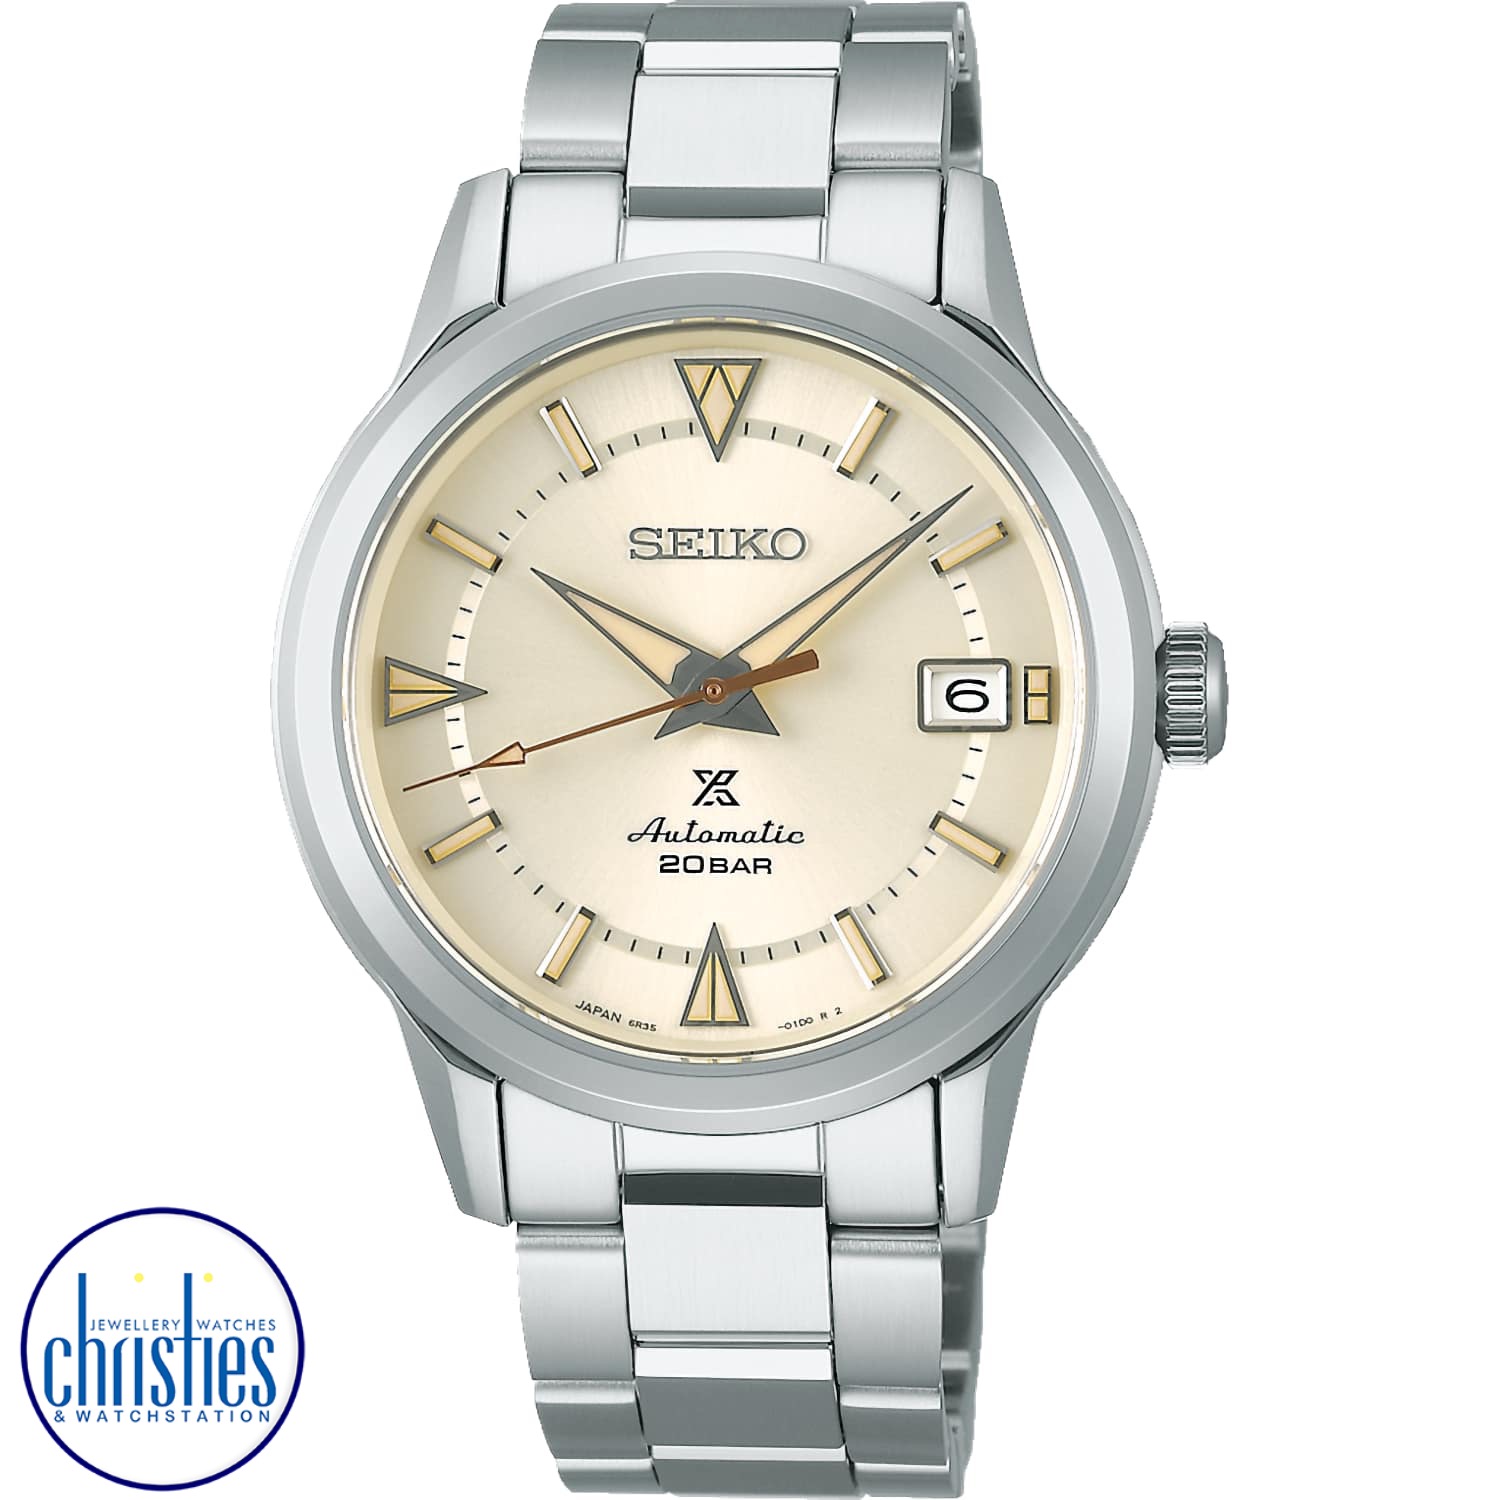 SPB241J Seiko  Prospex Alpinist Automatic Watch. Seiko SPB241J Prospex Land Series Alpinist 1959 Re-Interpretation Automatic Watch Afterpay - Split your purchase into 4 instalments - Pay for your purchase over 4 instalments, due every two weeks. You’ll fo